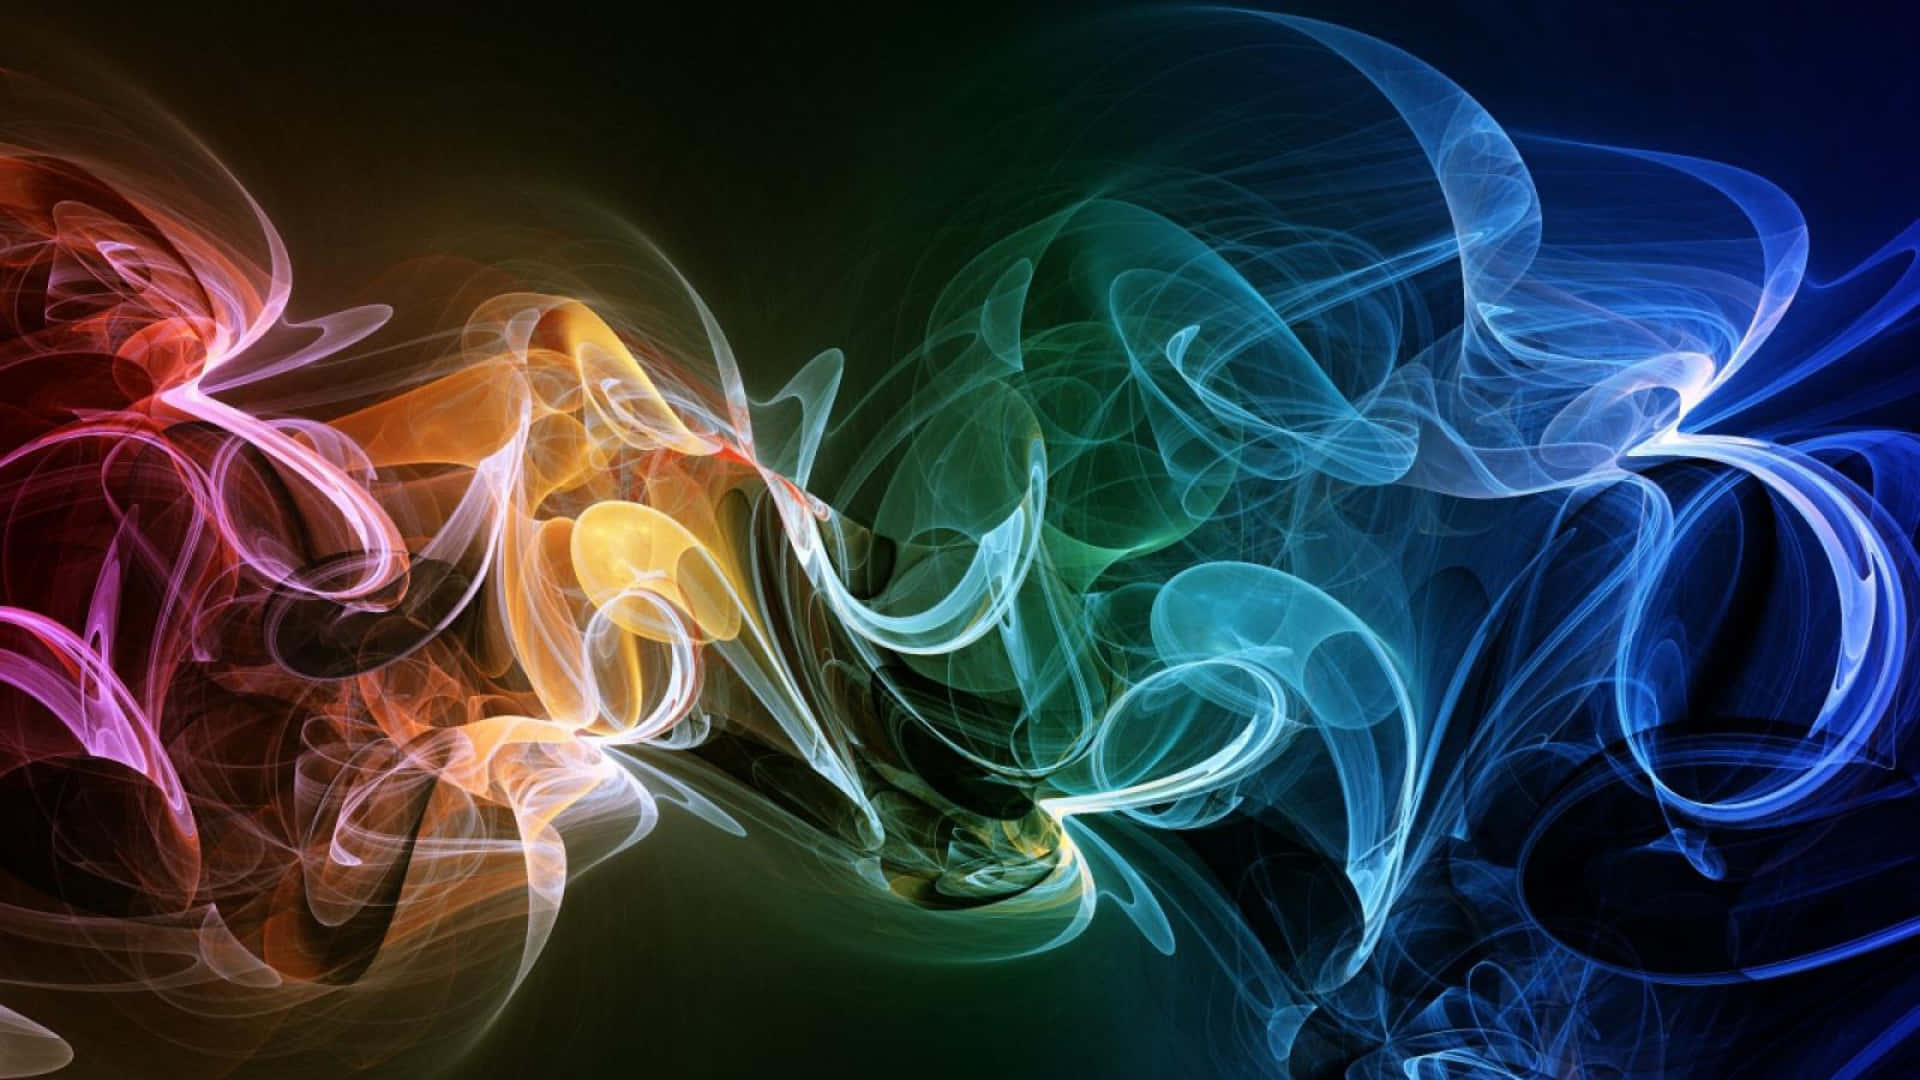 Breathe in the Colorful Smoke Wallpaper